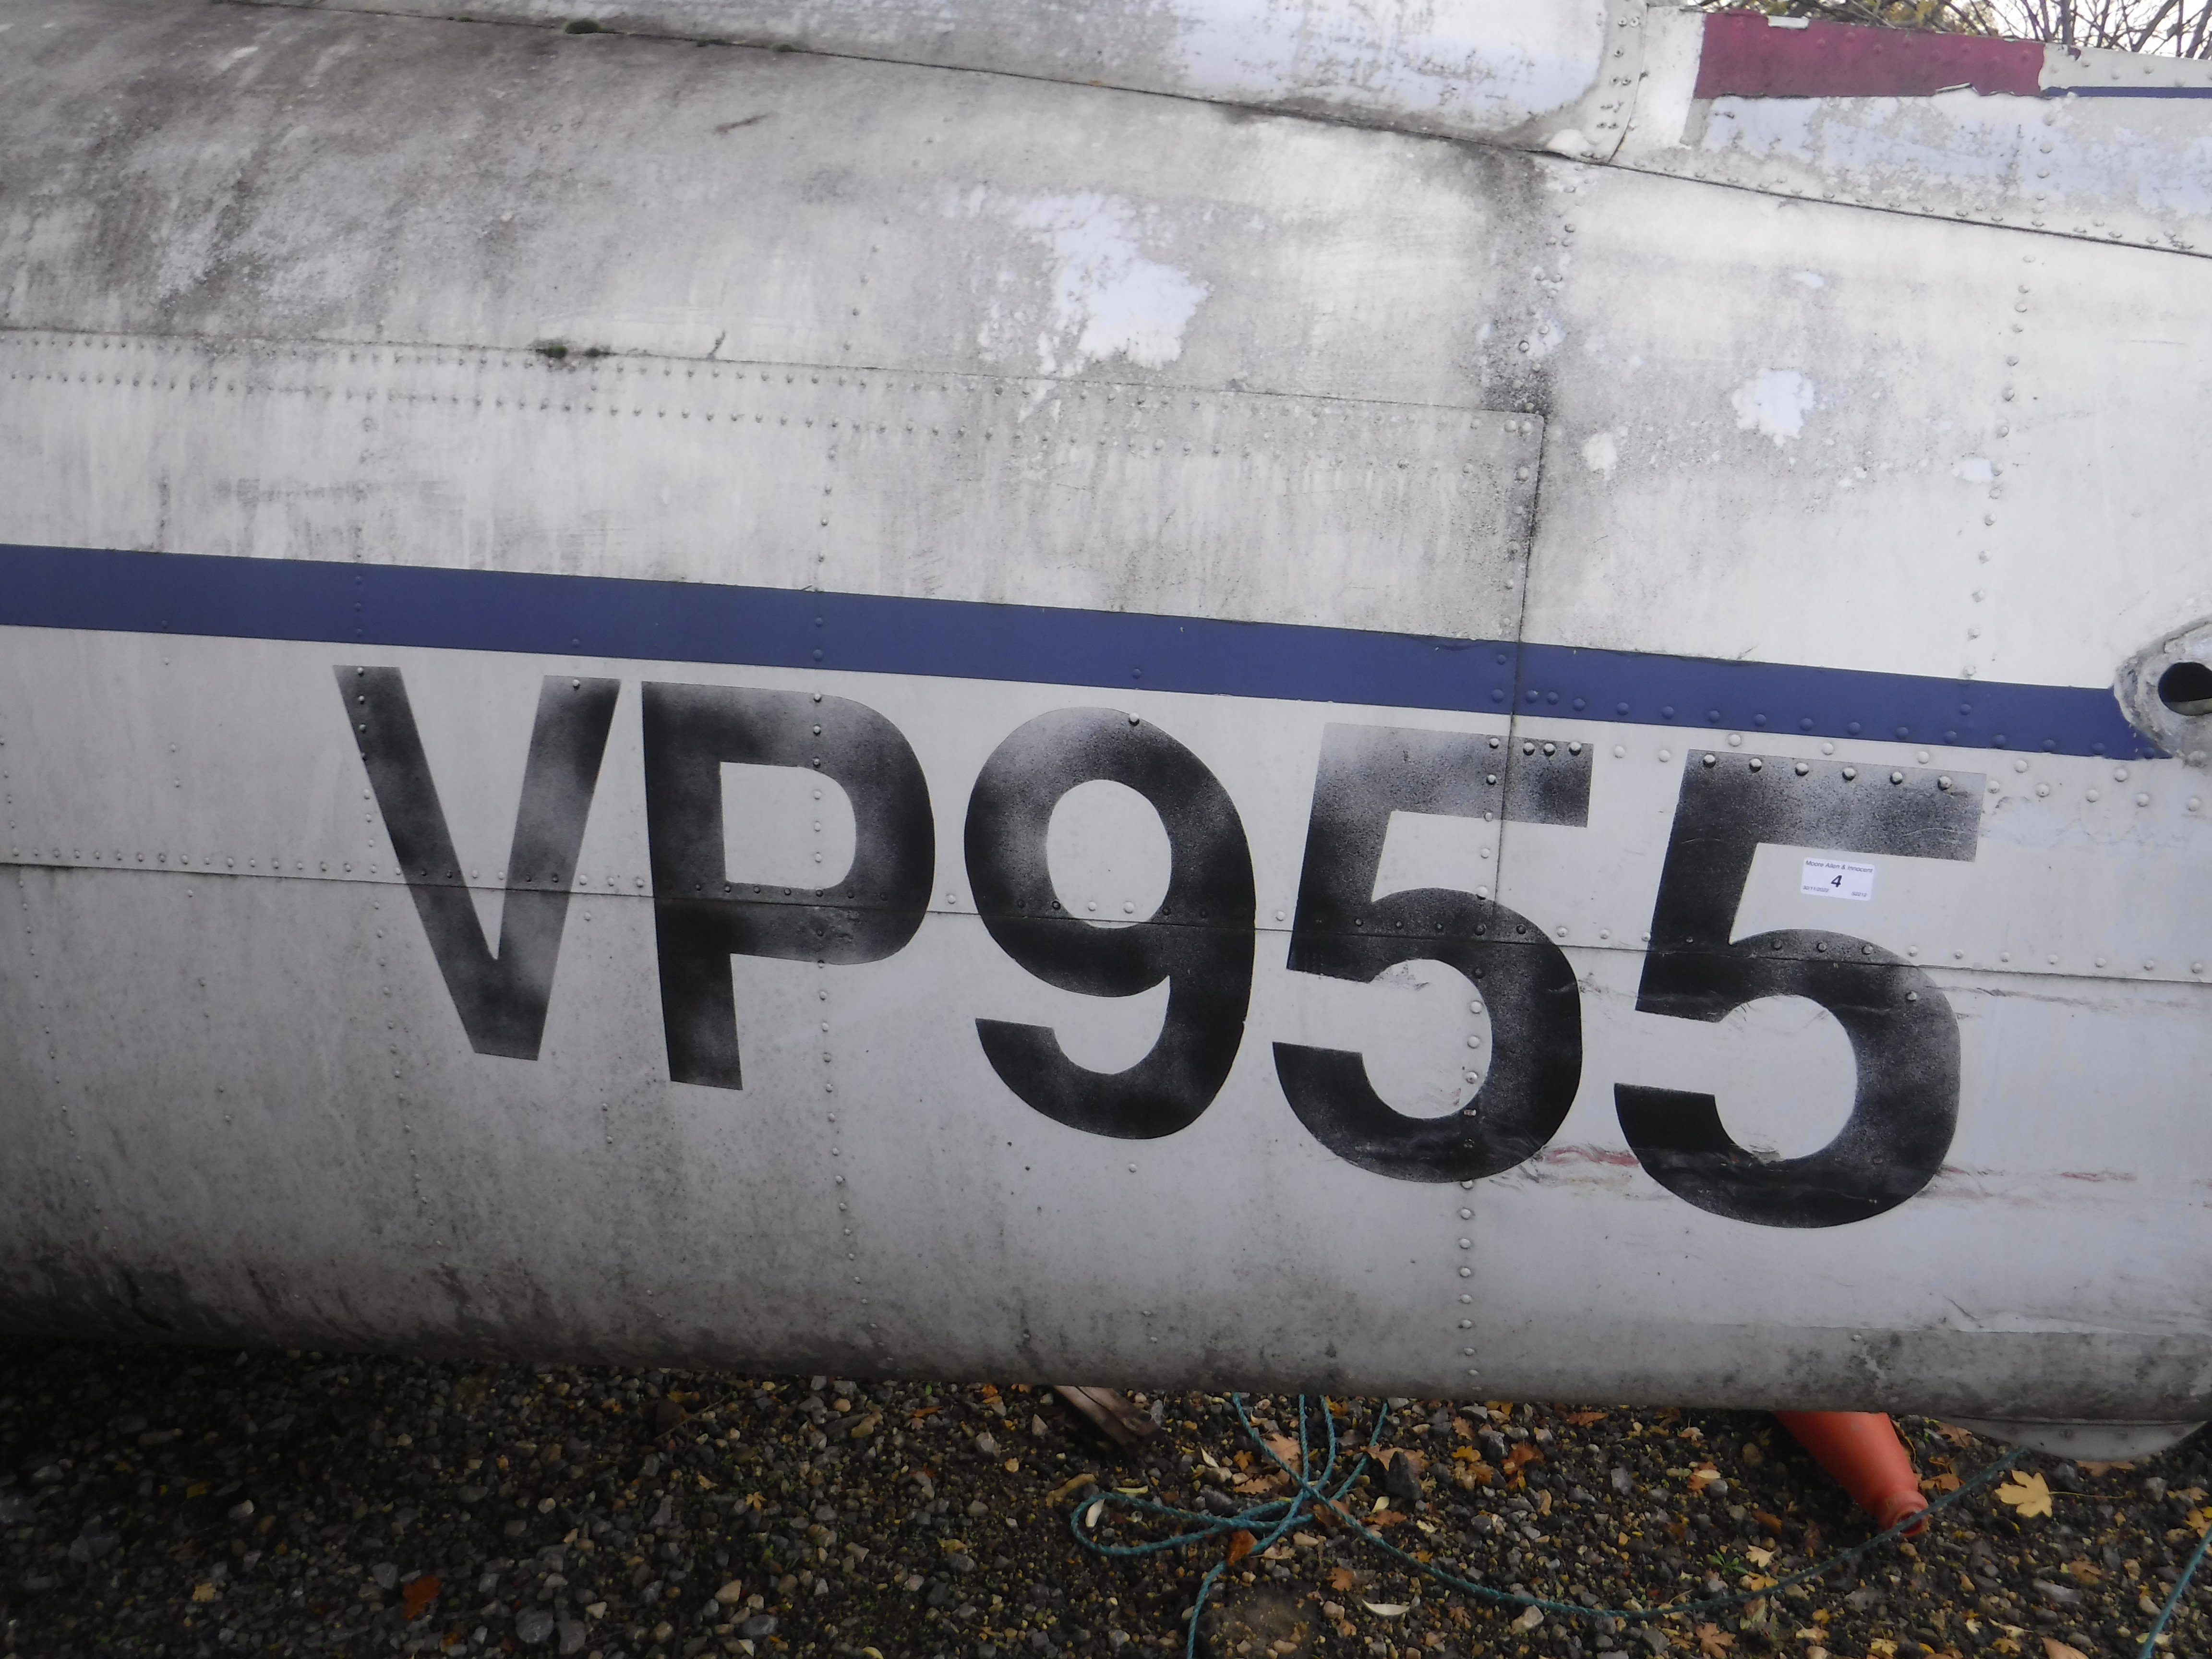 A De Havilland Dove aircraft fuselage "VP955" (believed to have been used for transporting various - Bild 2 aus 21